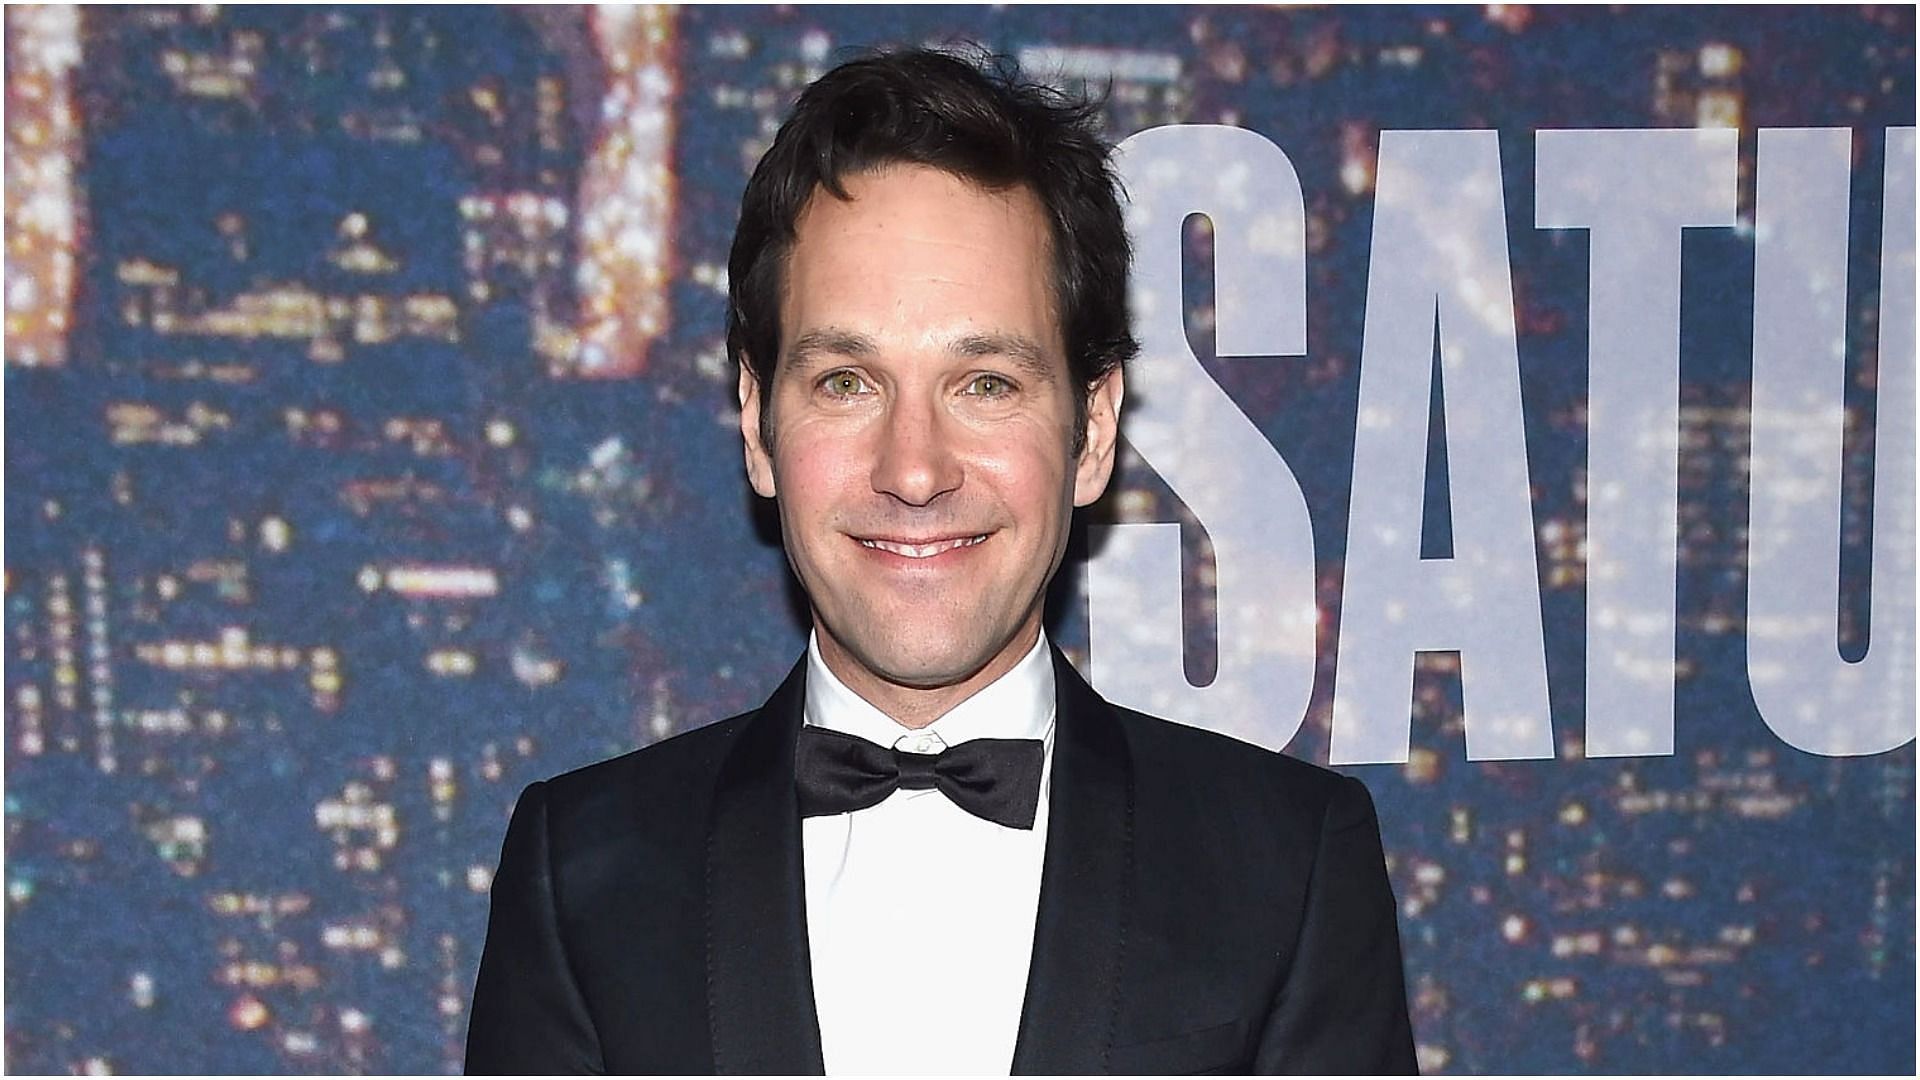 Paul Rudd is the host of the latest episode on Saturday Night Live (Image by Gary Gershoff via Getty Images)